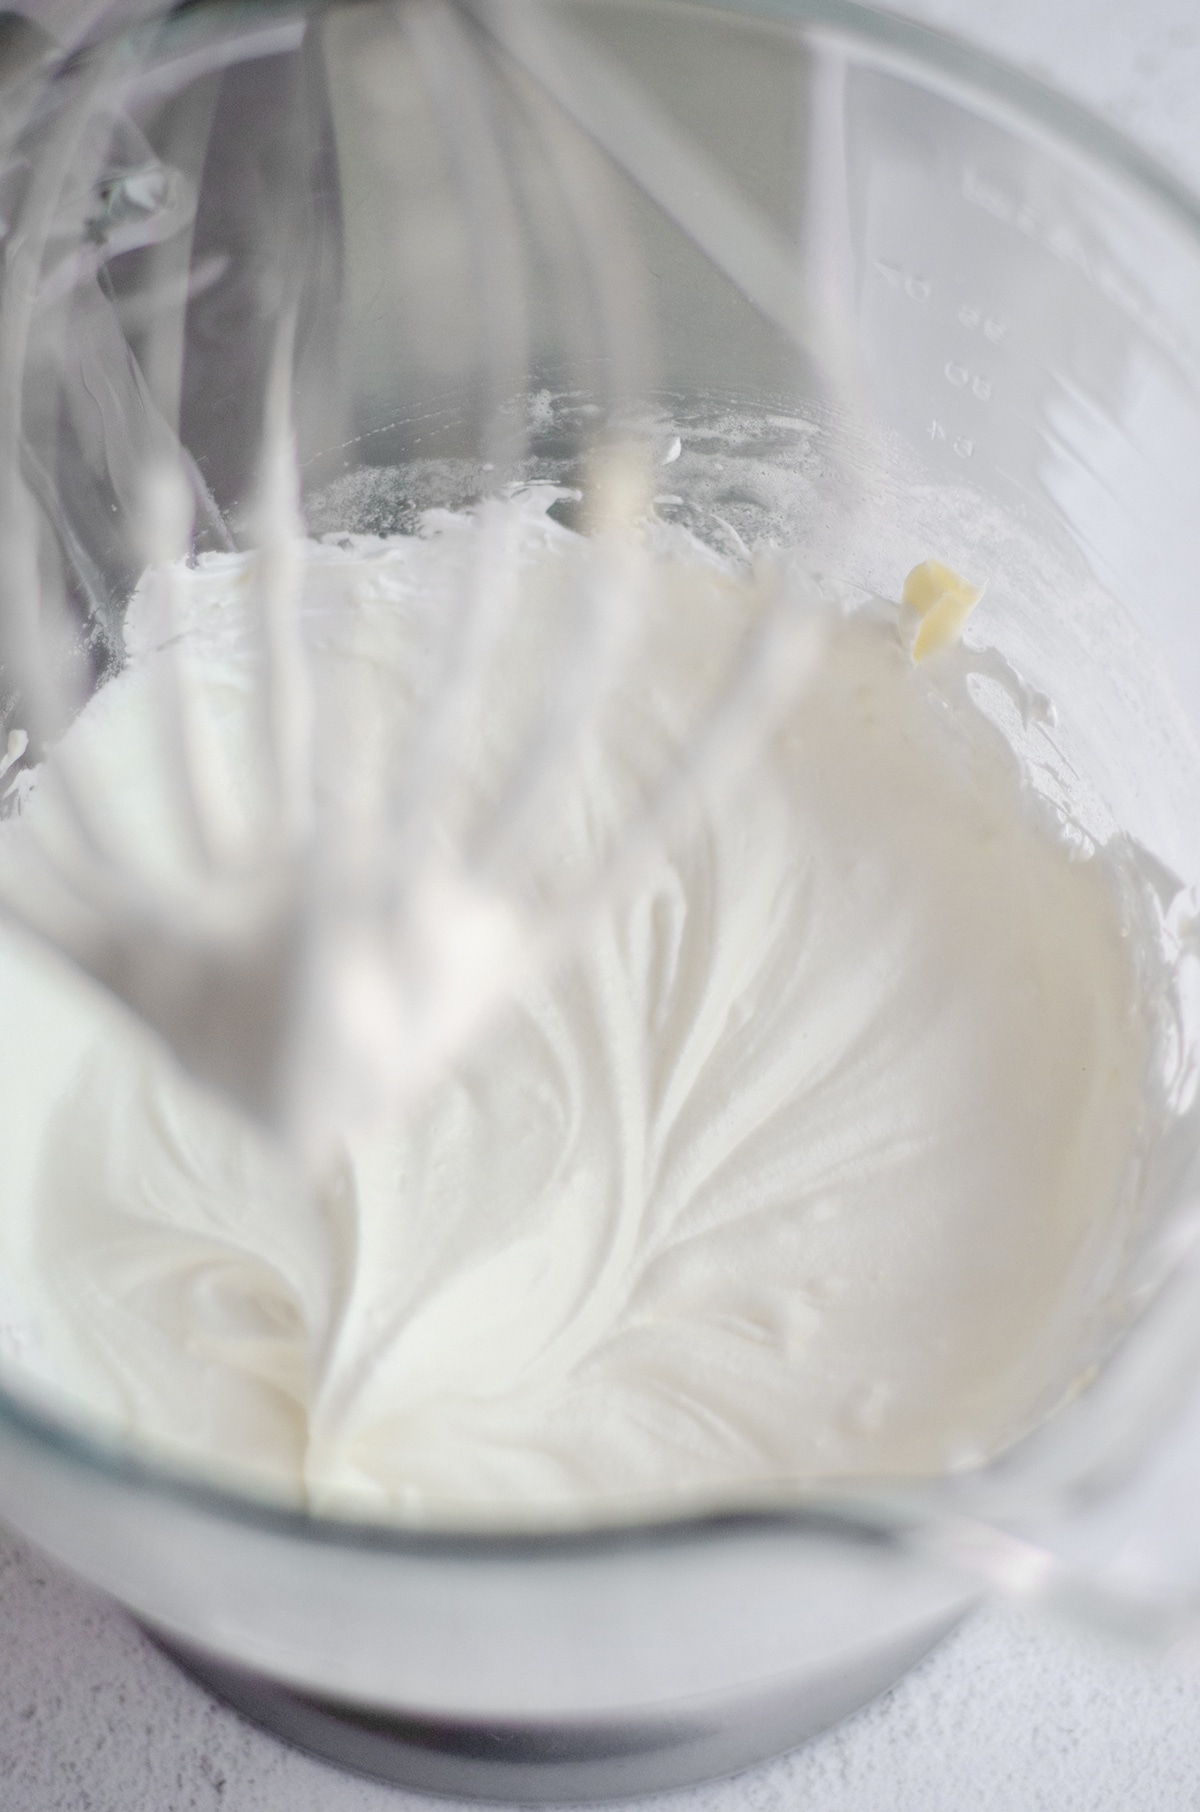 whipped egg whites in the bowl of a mixer with butter added in on its way to making swiss meringue buttercream